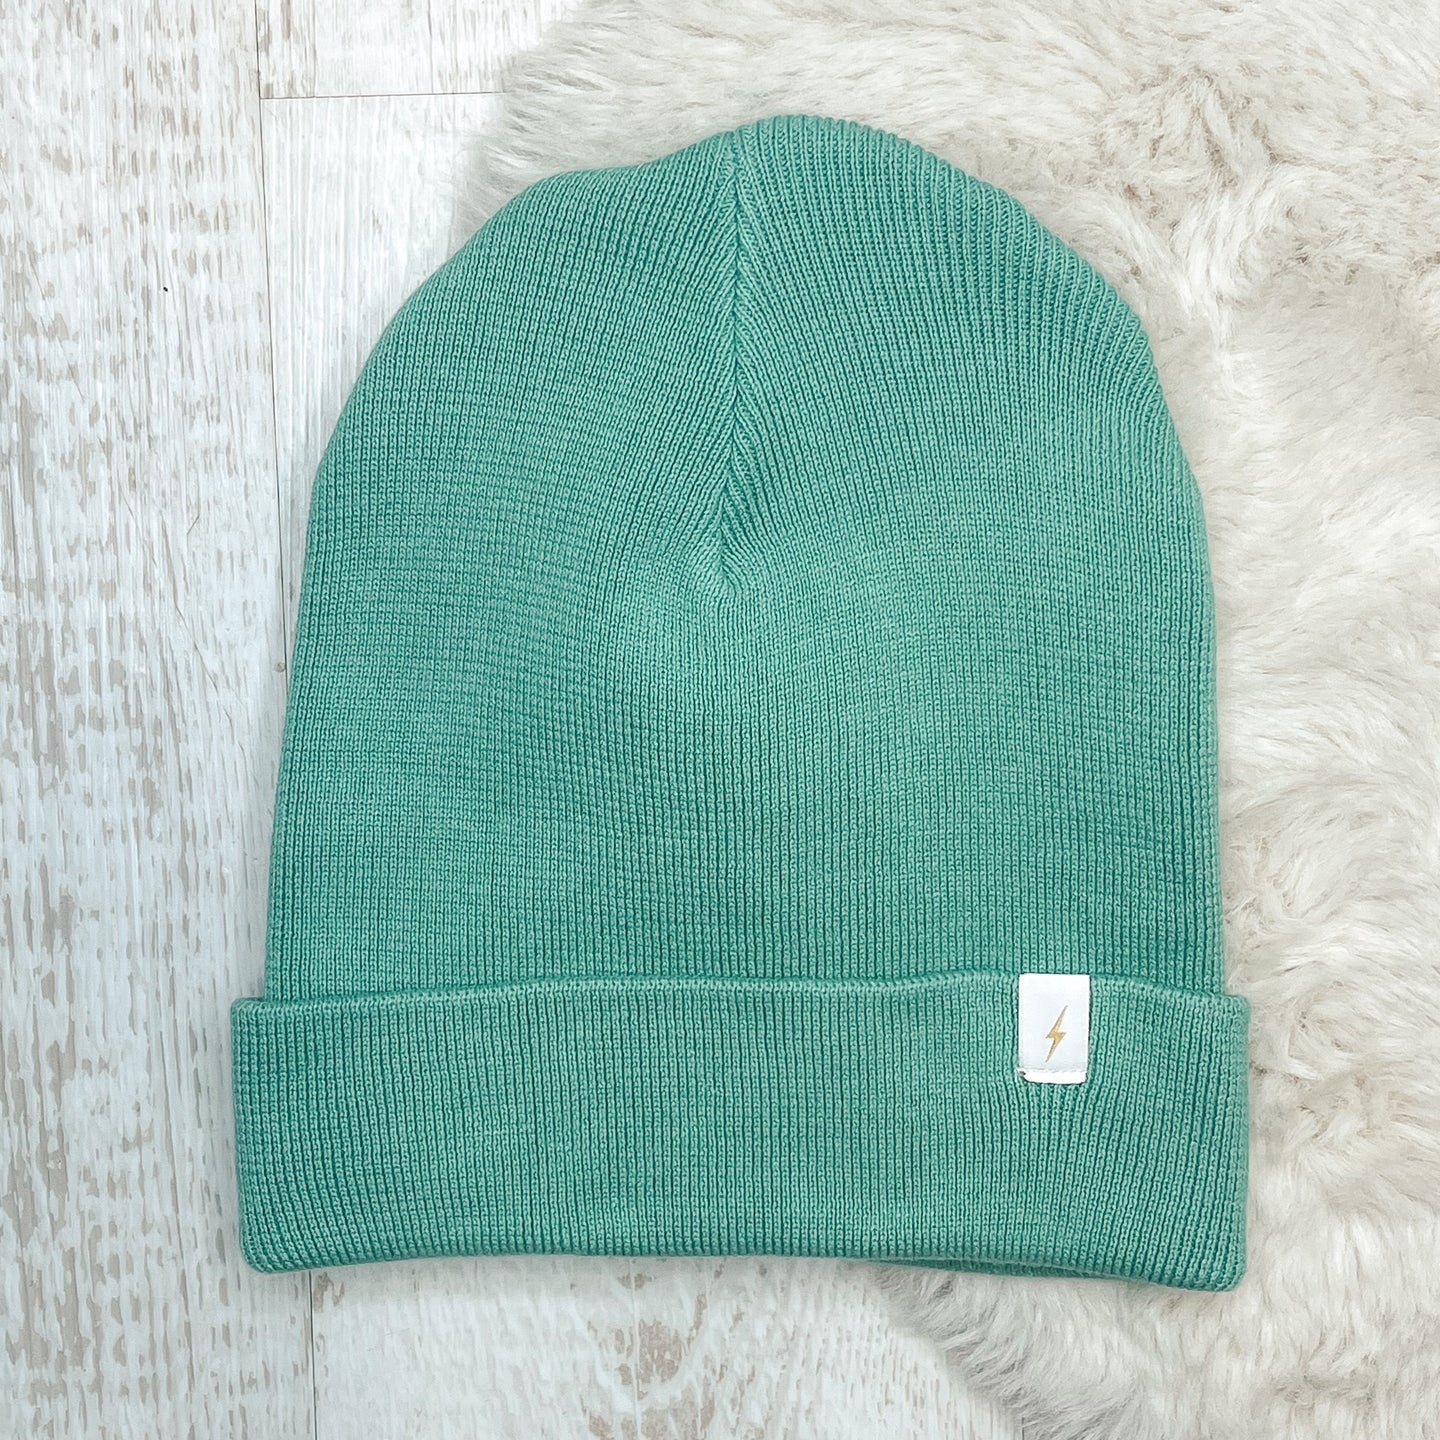 Unisex Kids & Adults Beanie Hat - Dusty Mint With Bolt